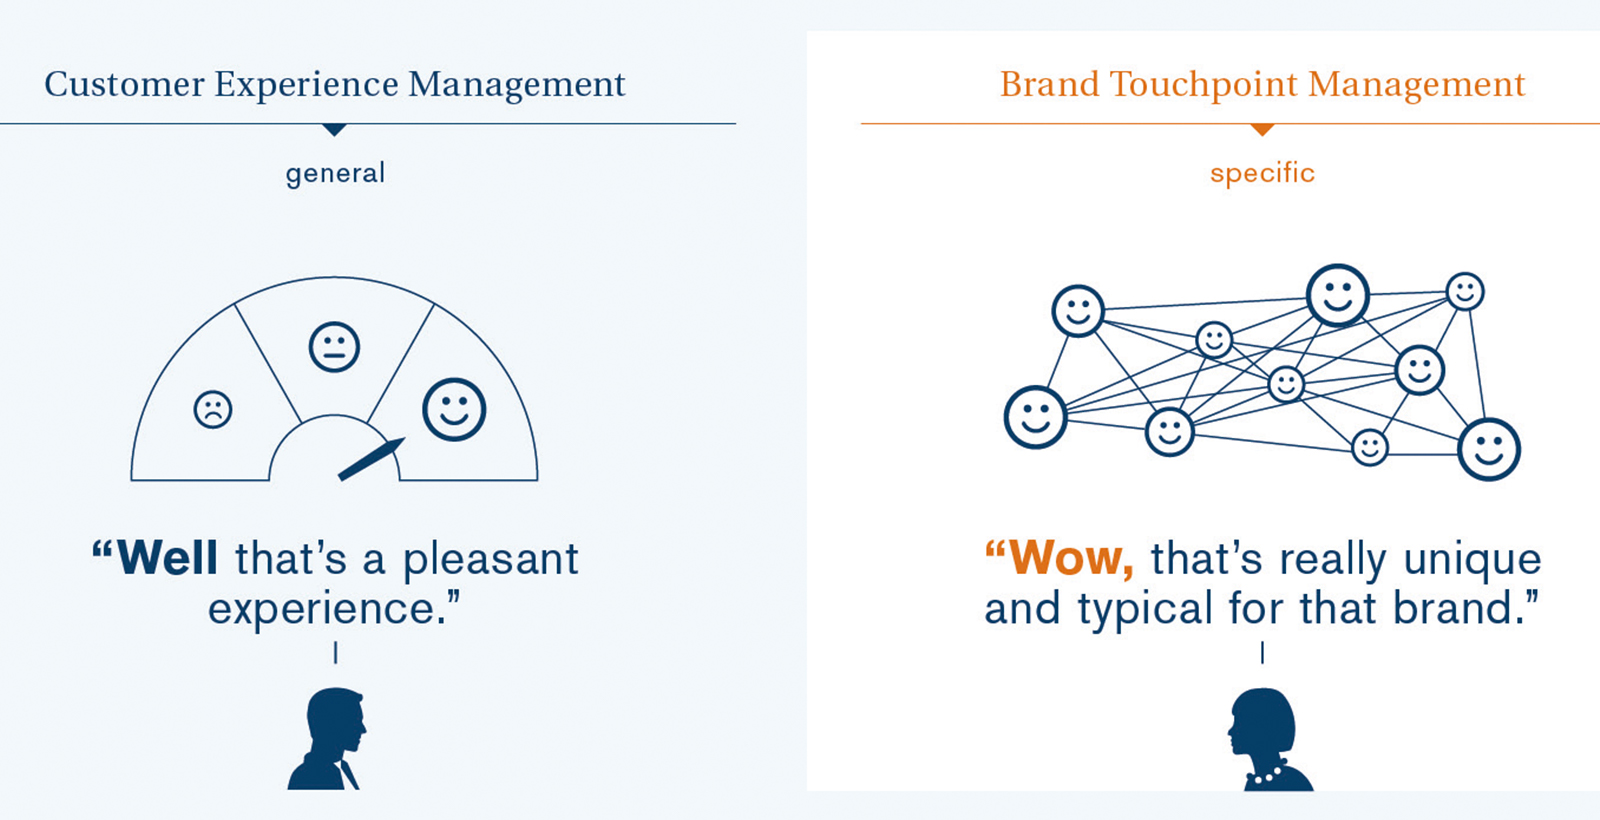 Measuring touchpoint effectiveness in customer experience